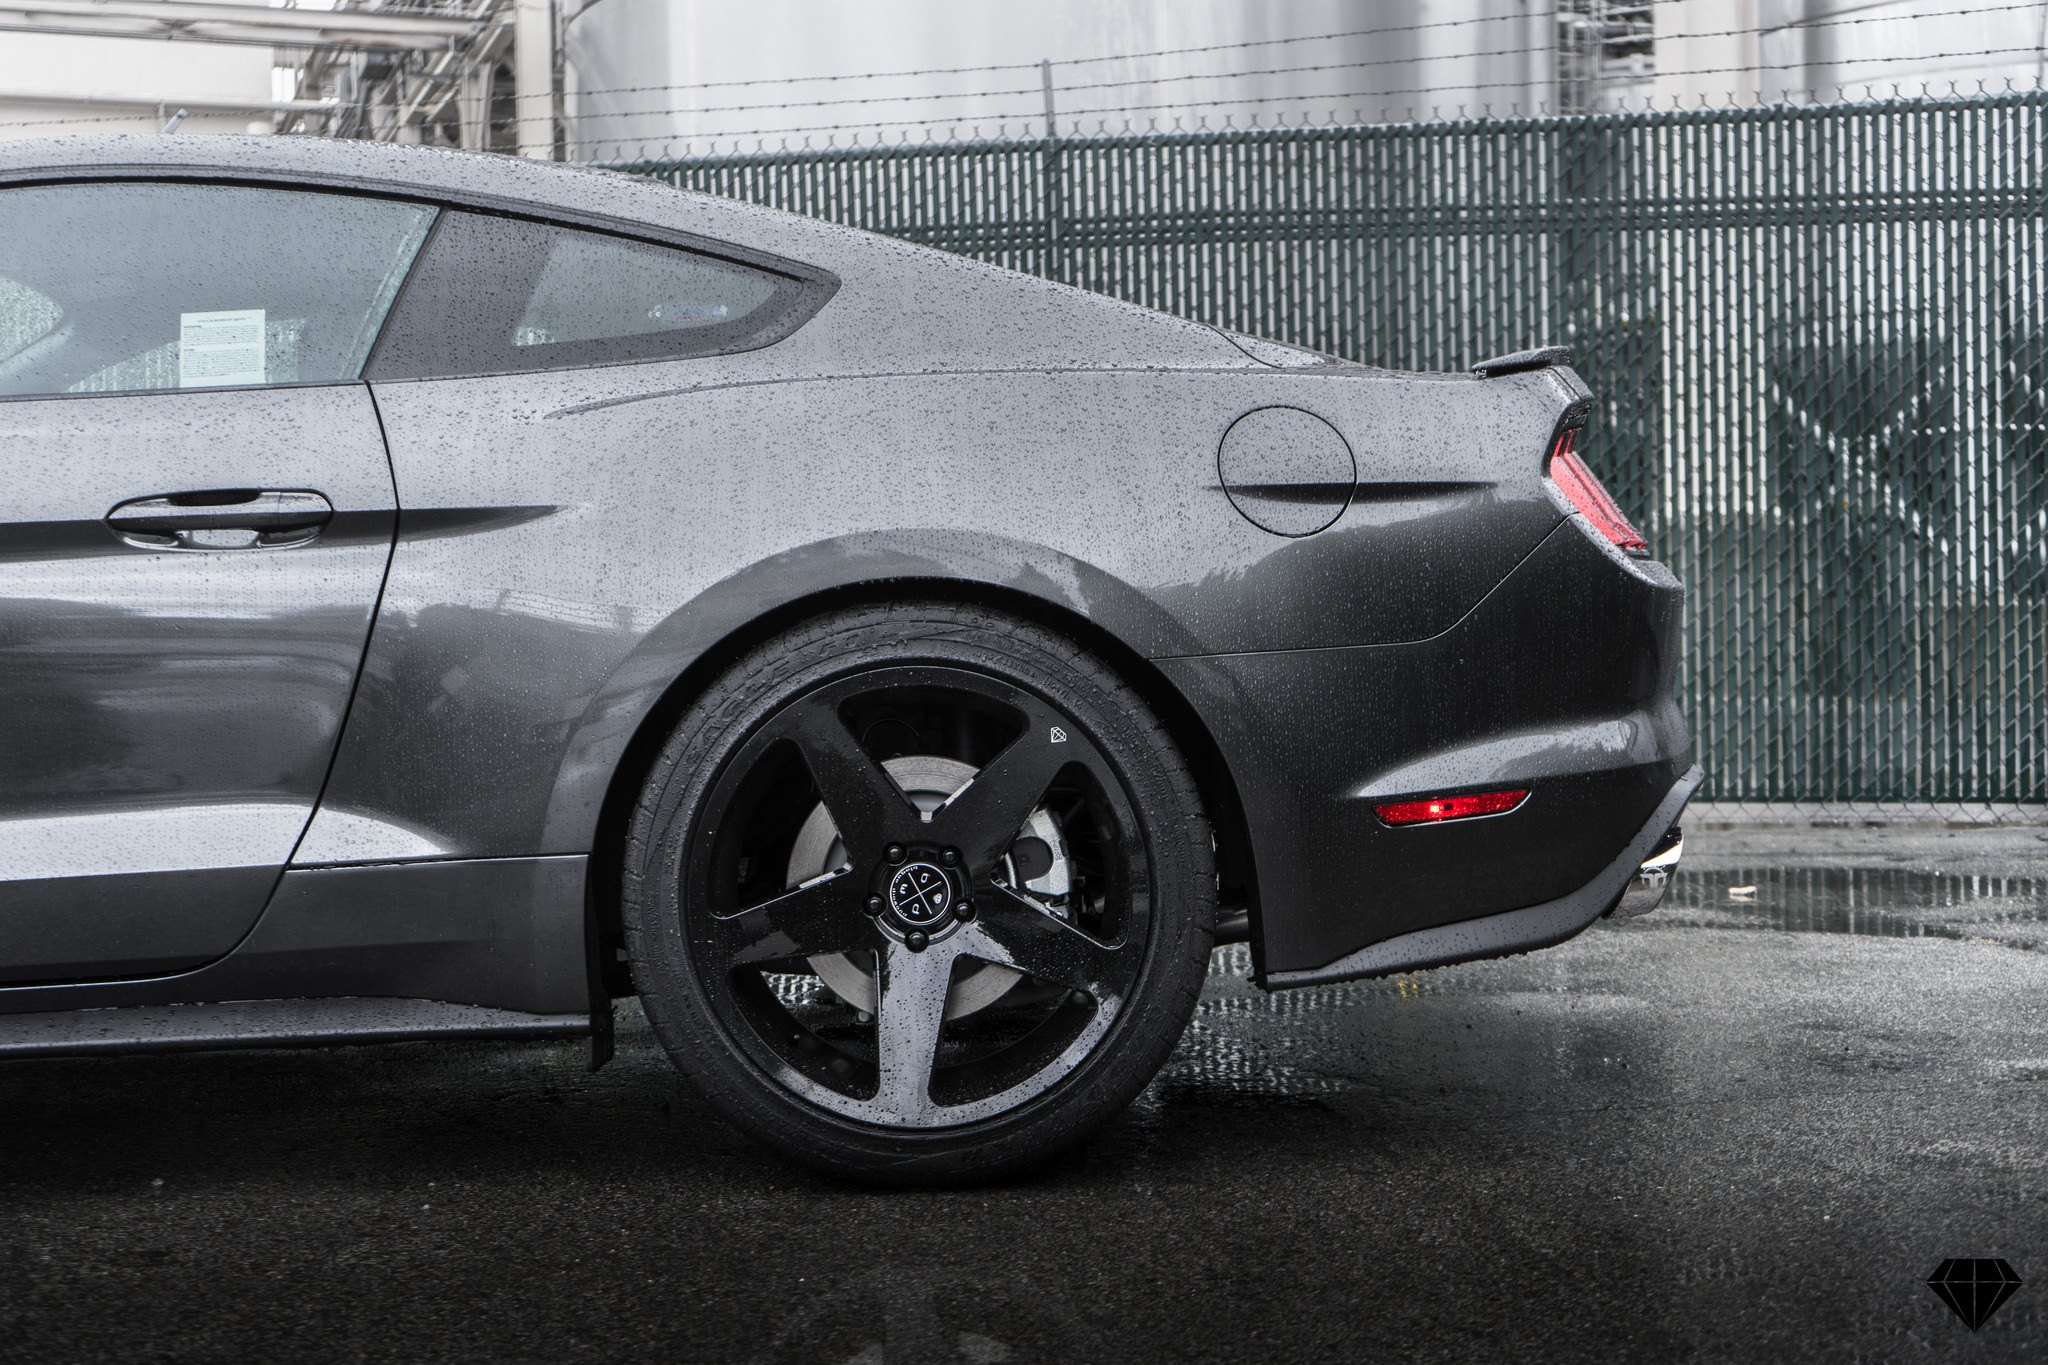 20 Inch Blaque Diamond Rims on Gray Ford Mustang GT - Photo by Blaque Diamond Wheels